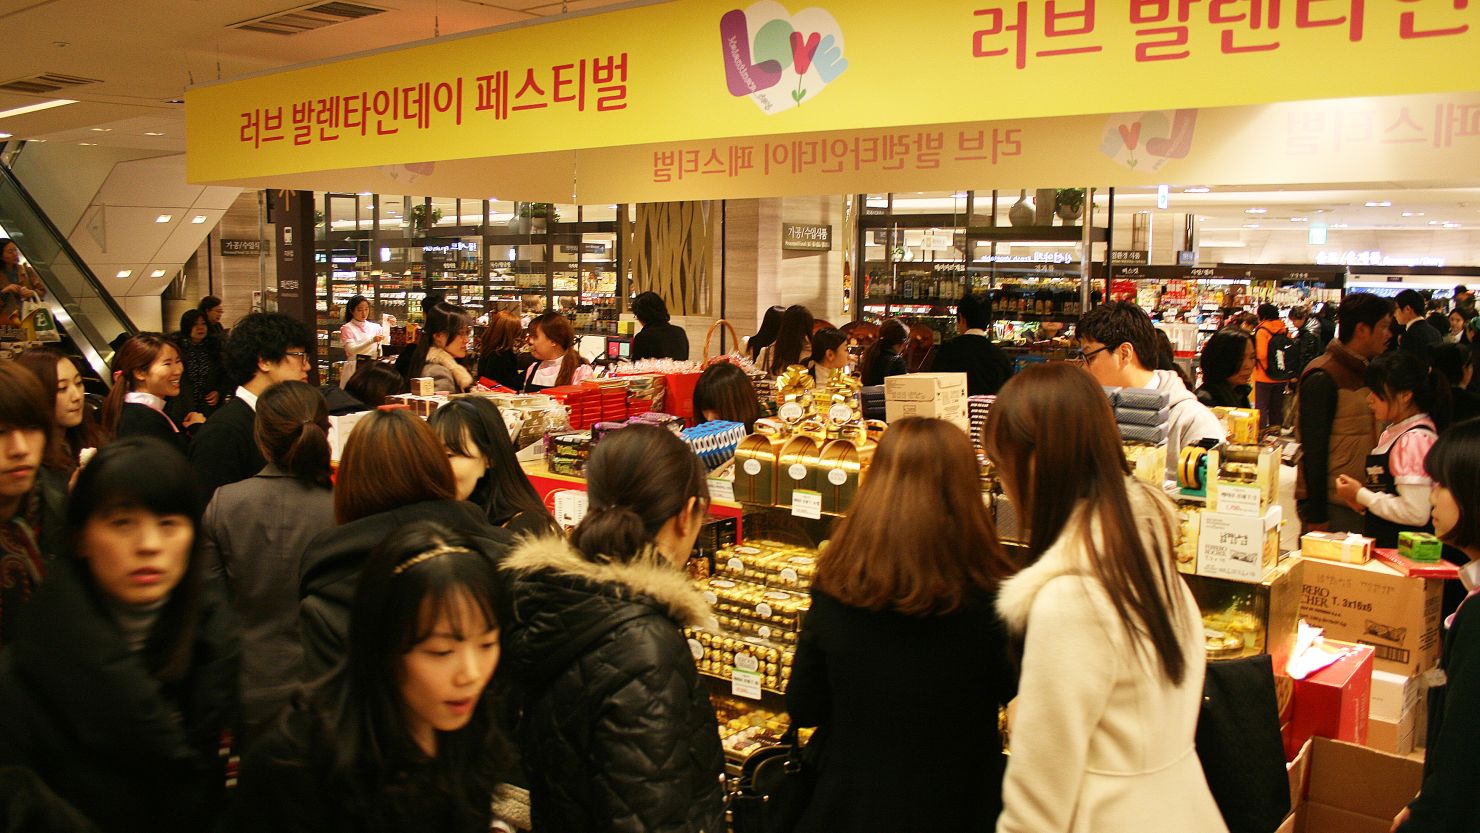 Early holiday shopping at No Brand Korea's Grand Sale